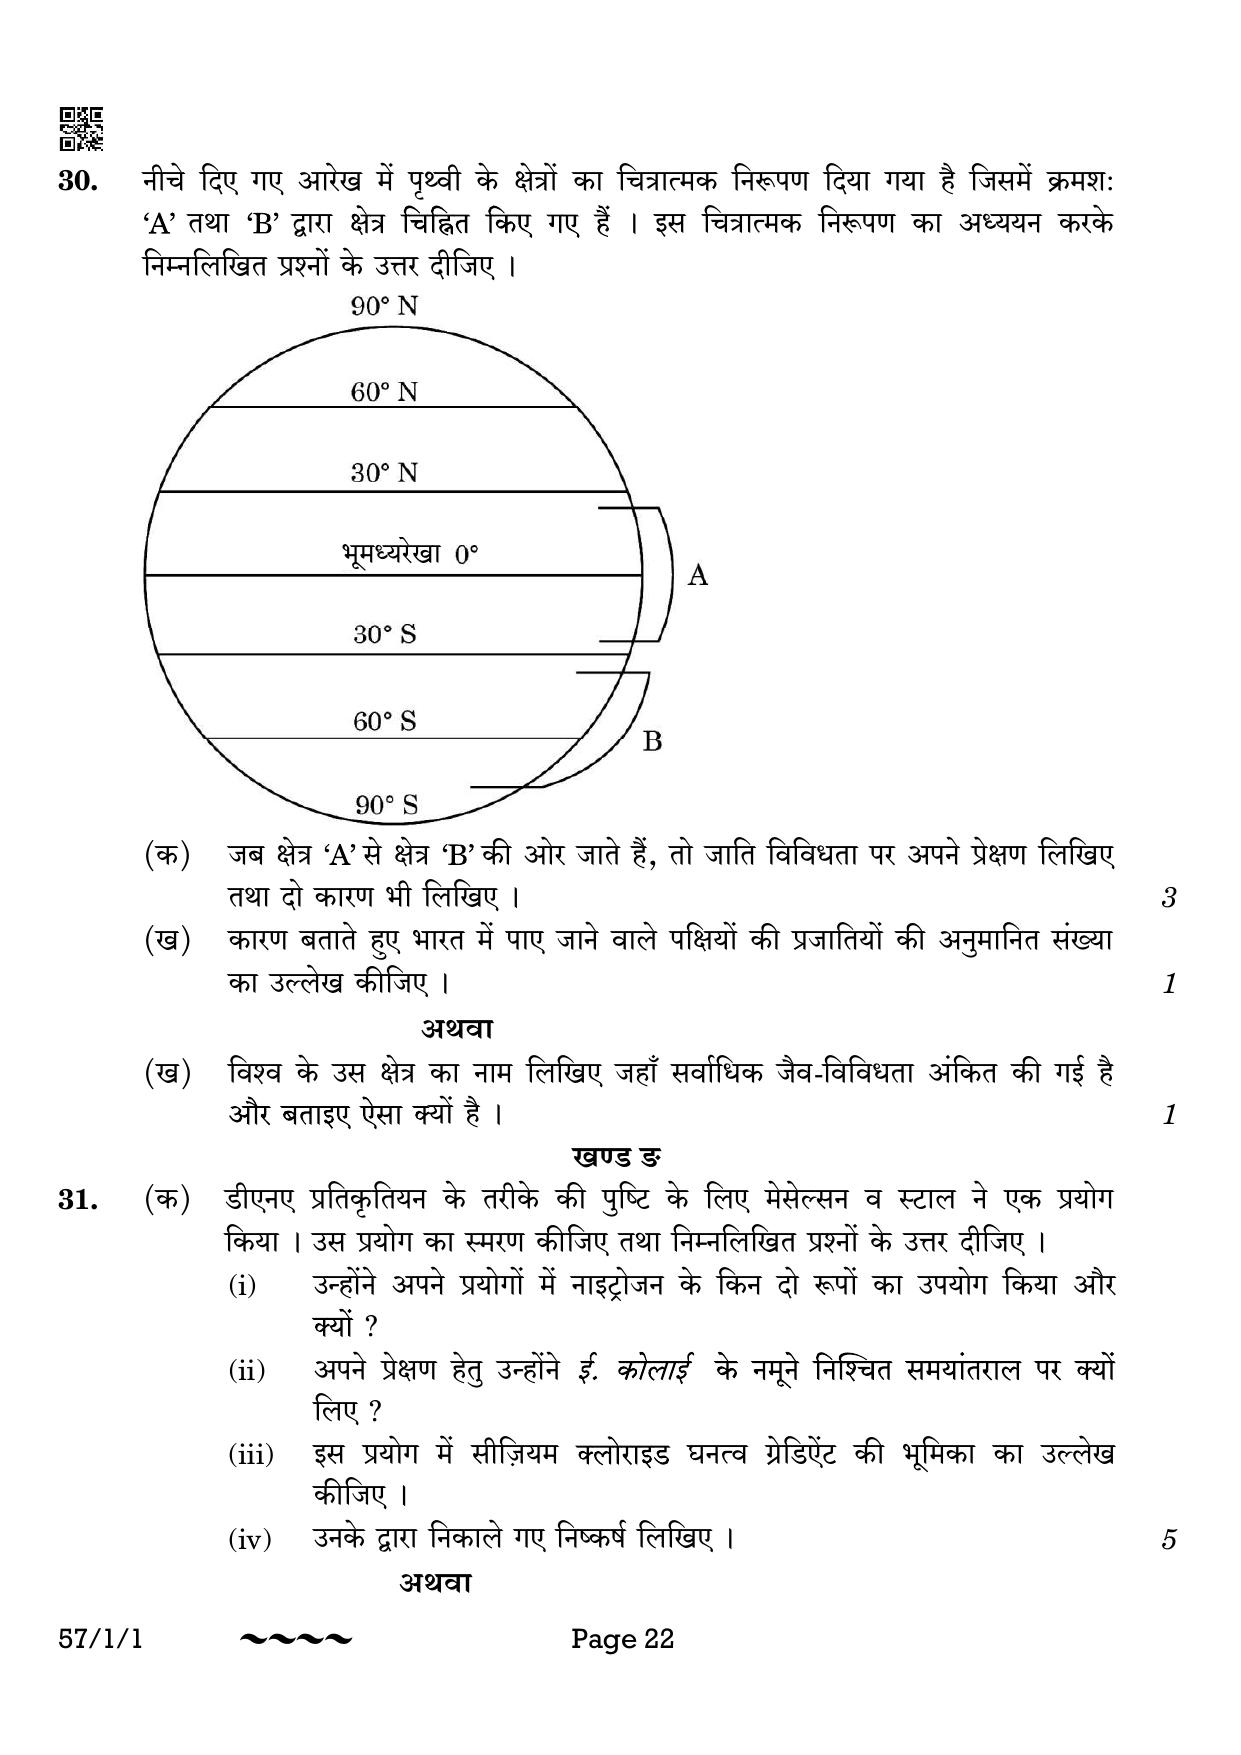 CBSE Class 12 57-1-1 Biology 2023 Question Paper - Page 22